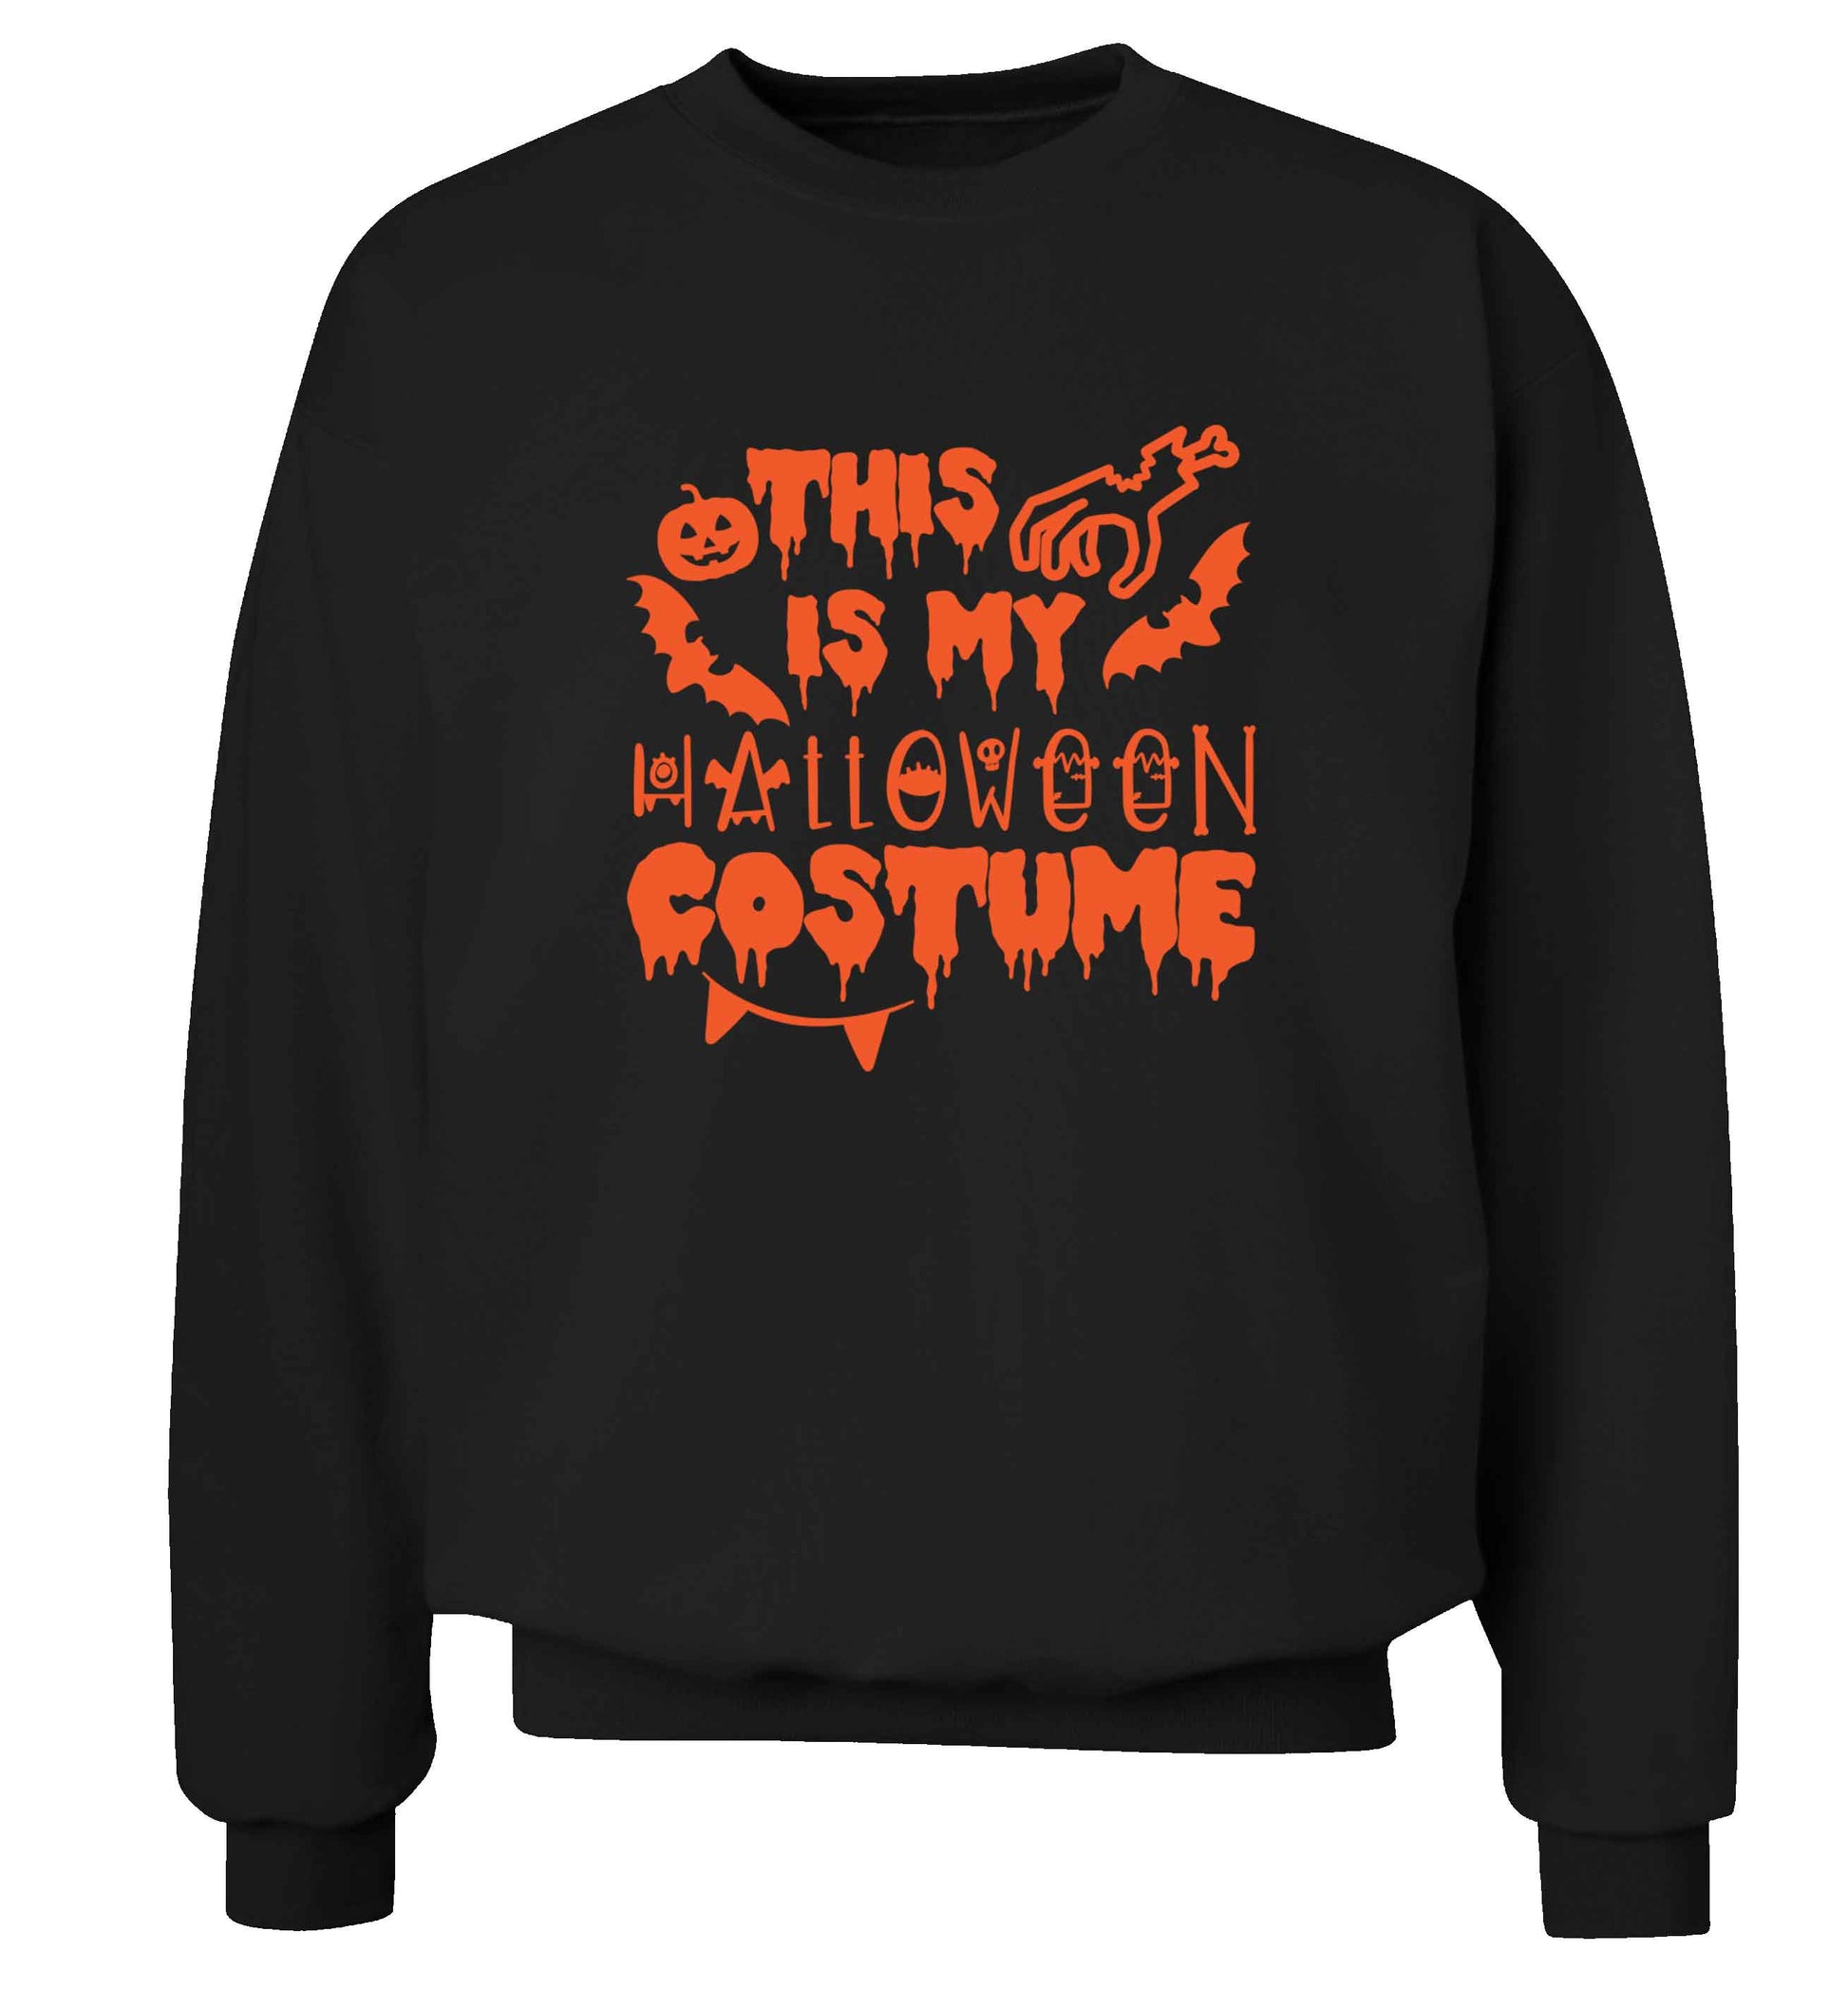 This is my halloween costume adult's unisex black sweater 2XL